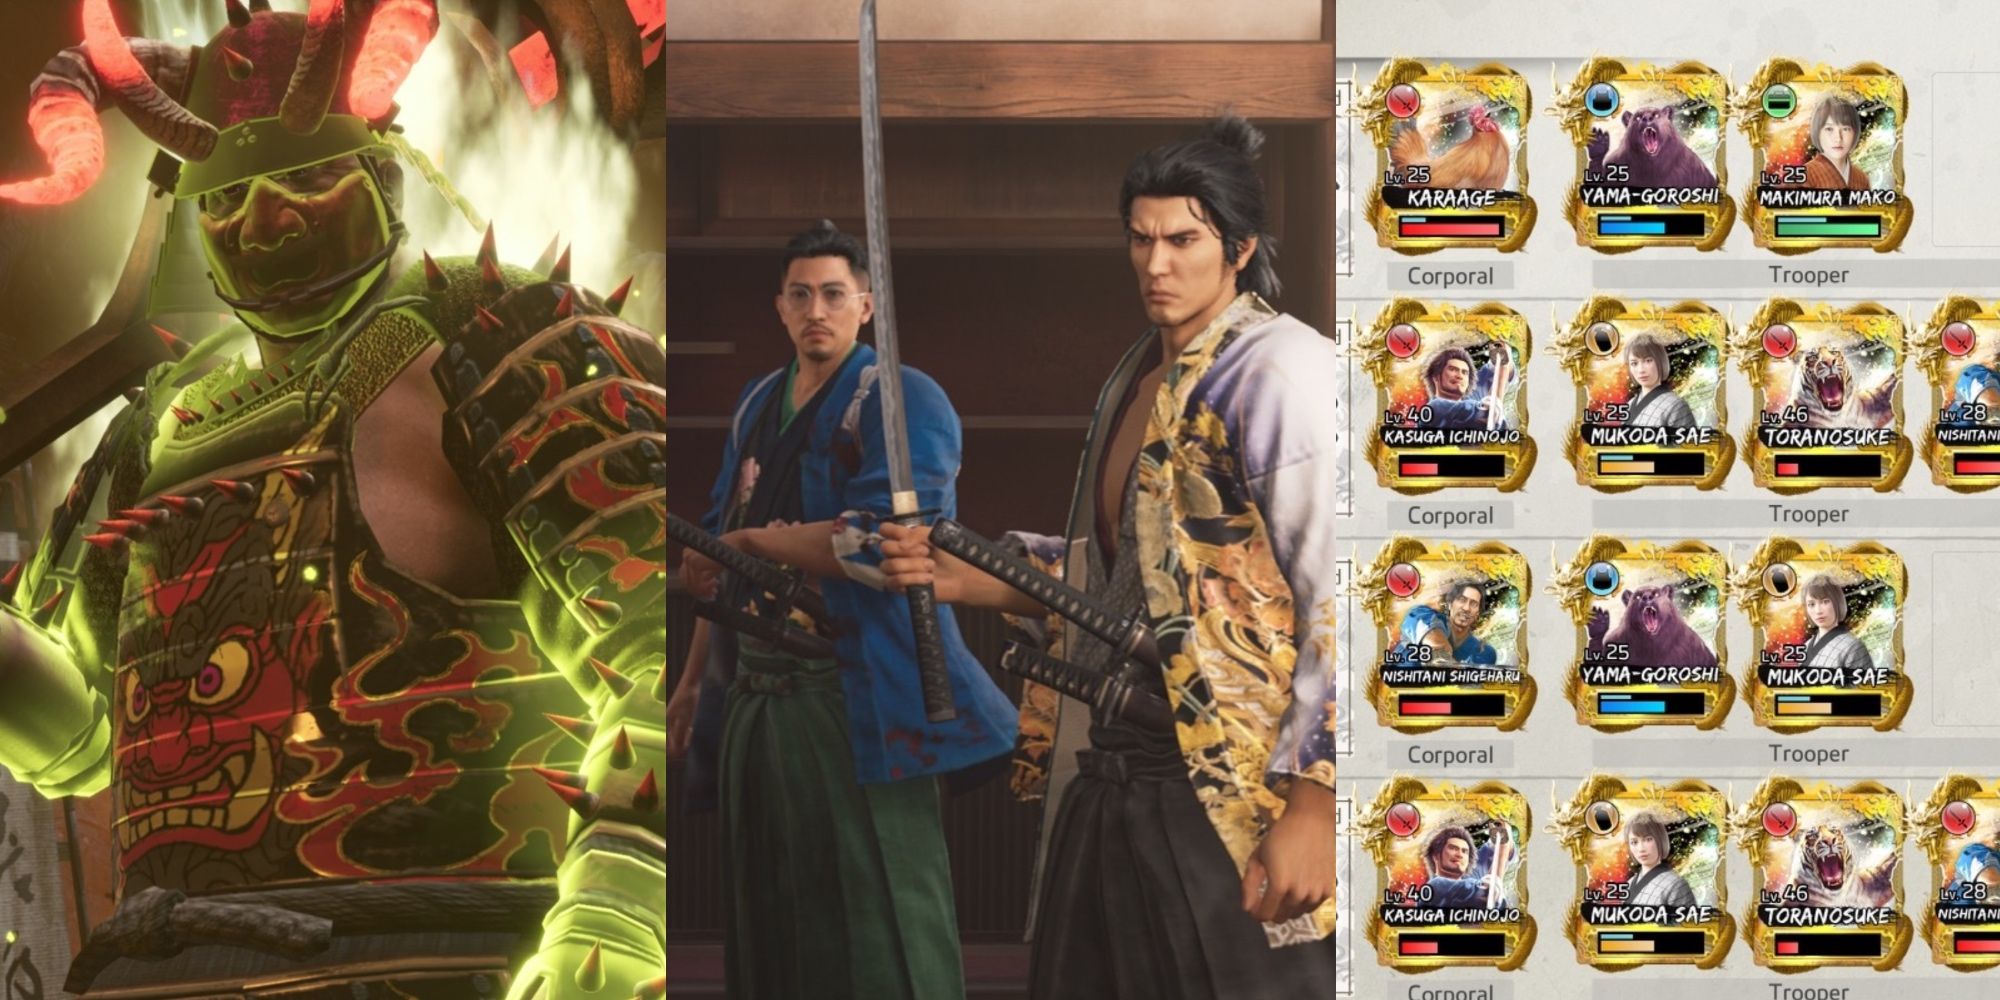 A large Battle Dungeon boss radiates energy. Ryoma prepares to fight alongside his Shinsengumi captains. Trooper Cards in their respective teams.